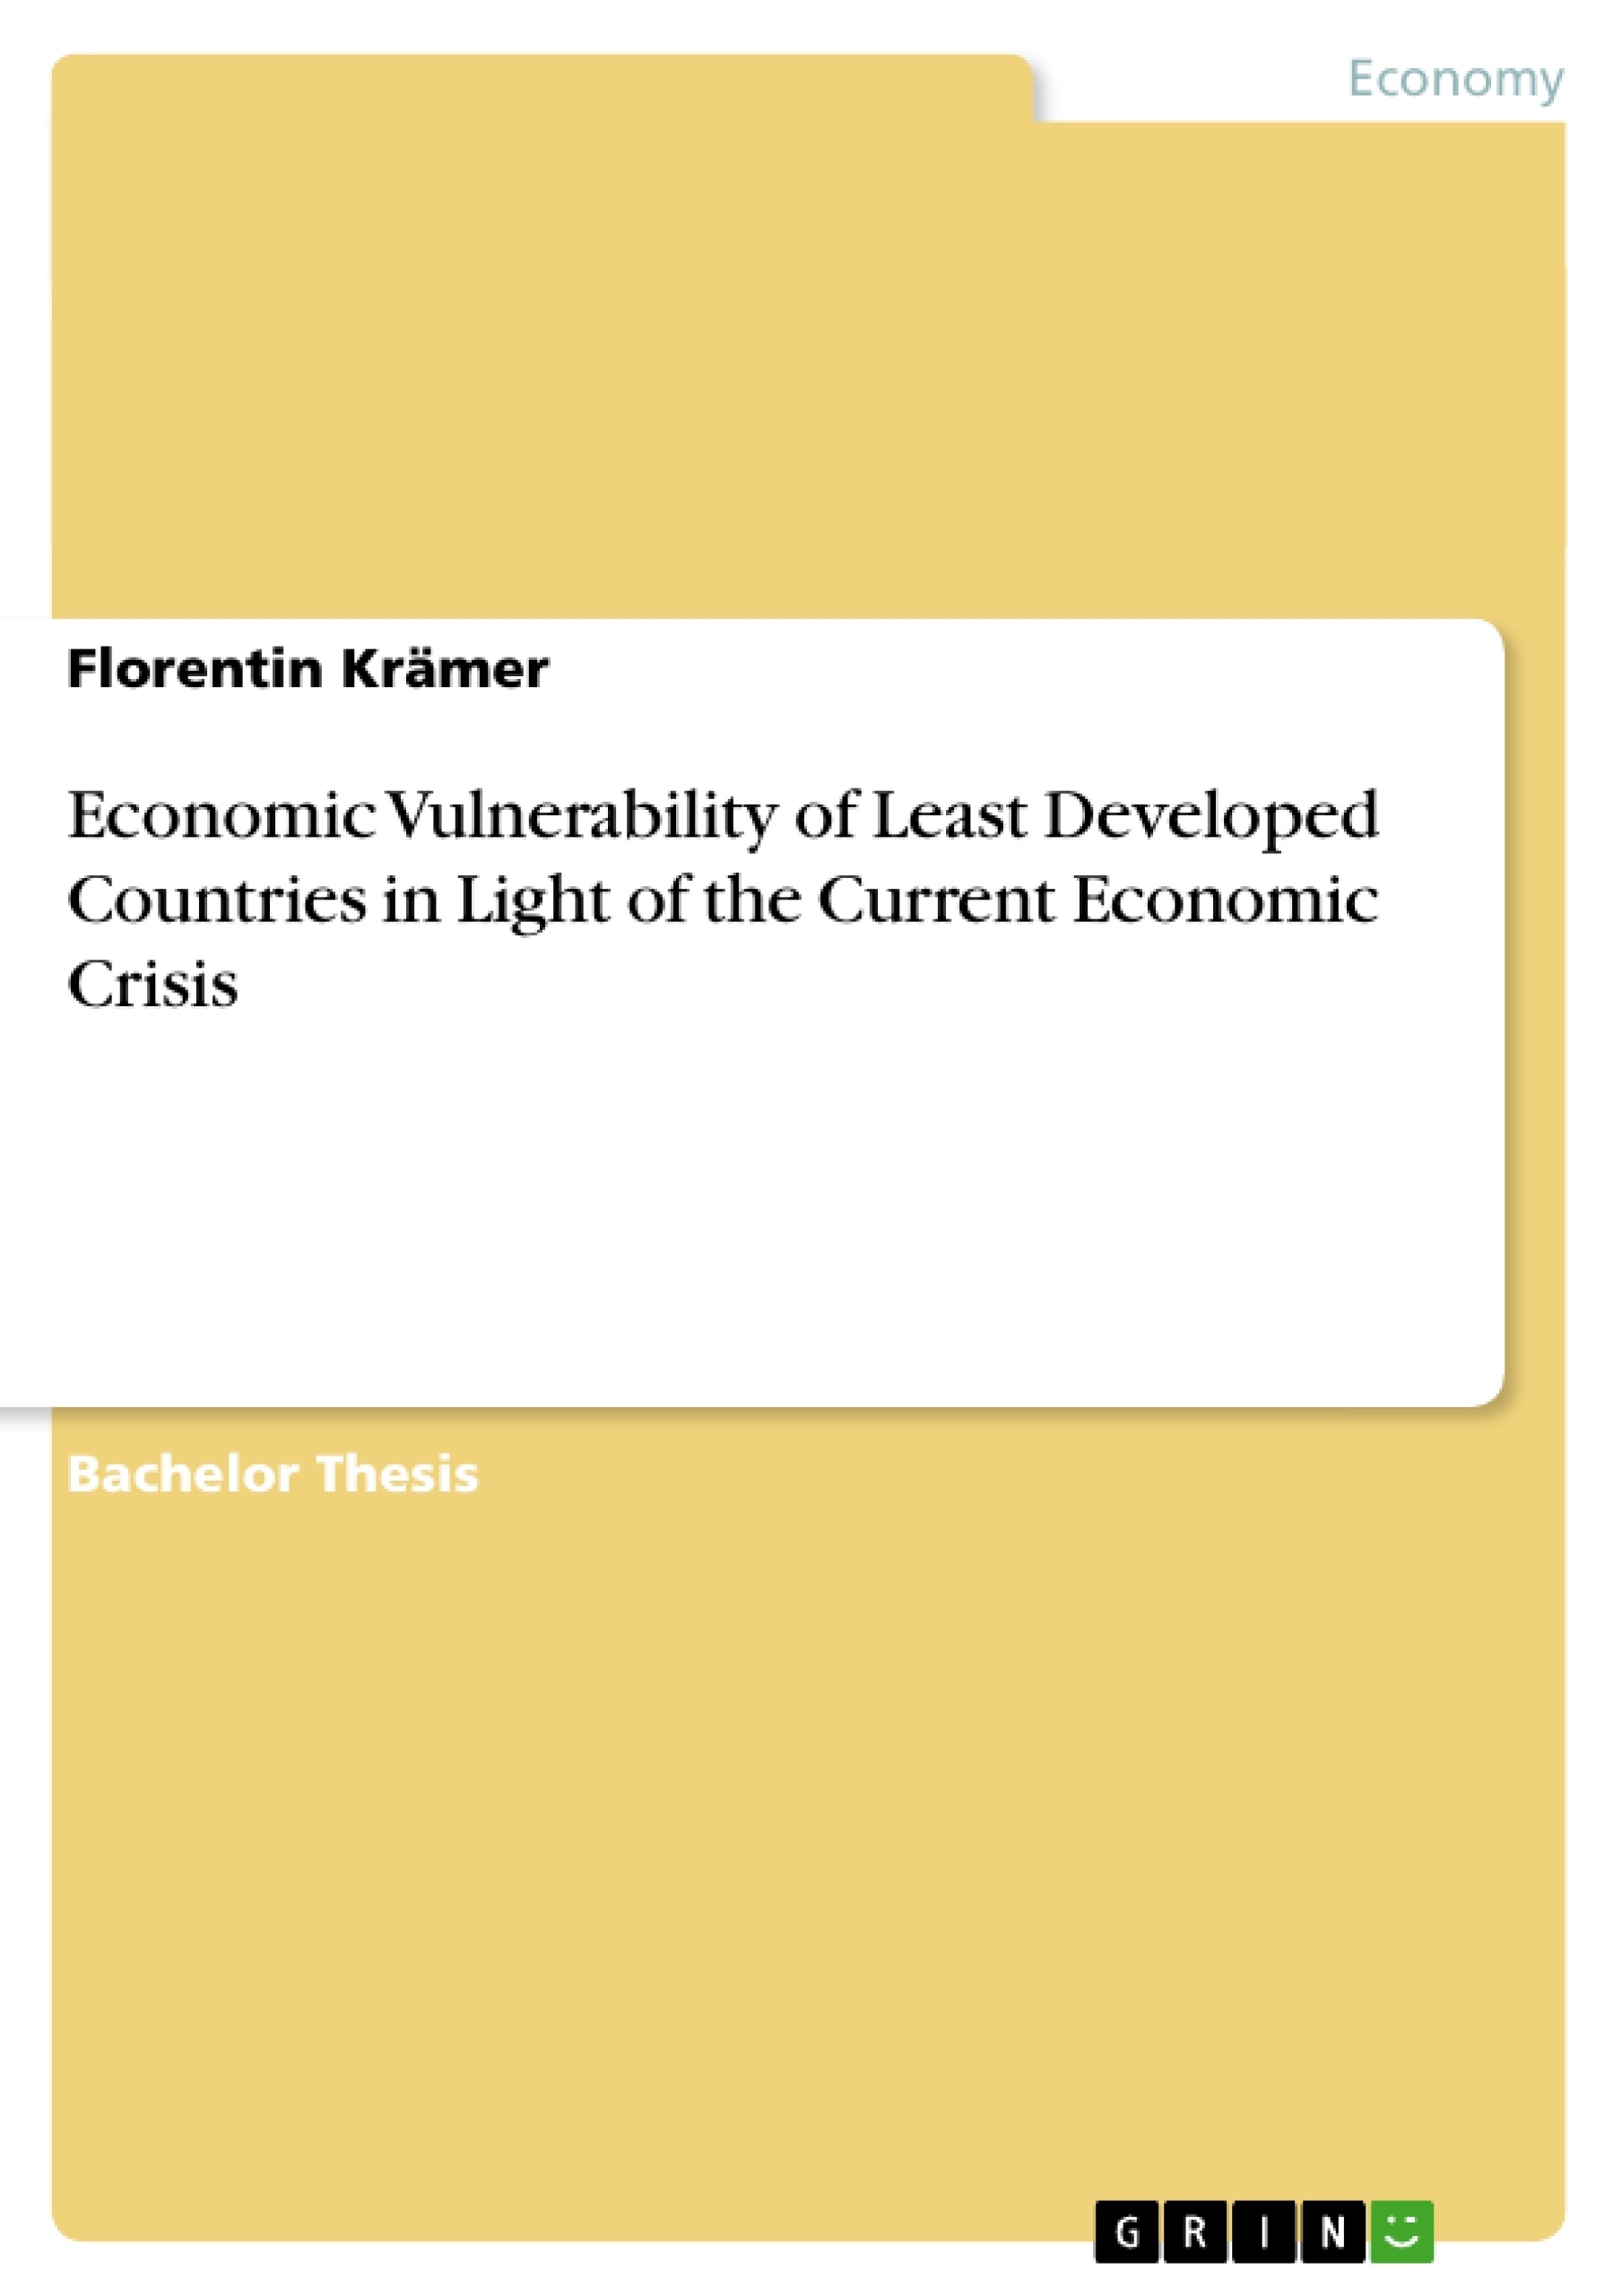 Title: Economic Vulnerability of Least Developed Countries in Light of the Current Economic Crisis